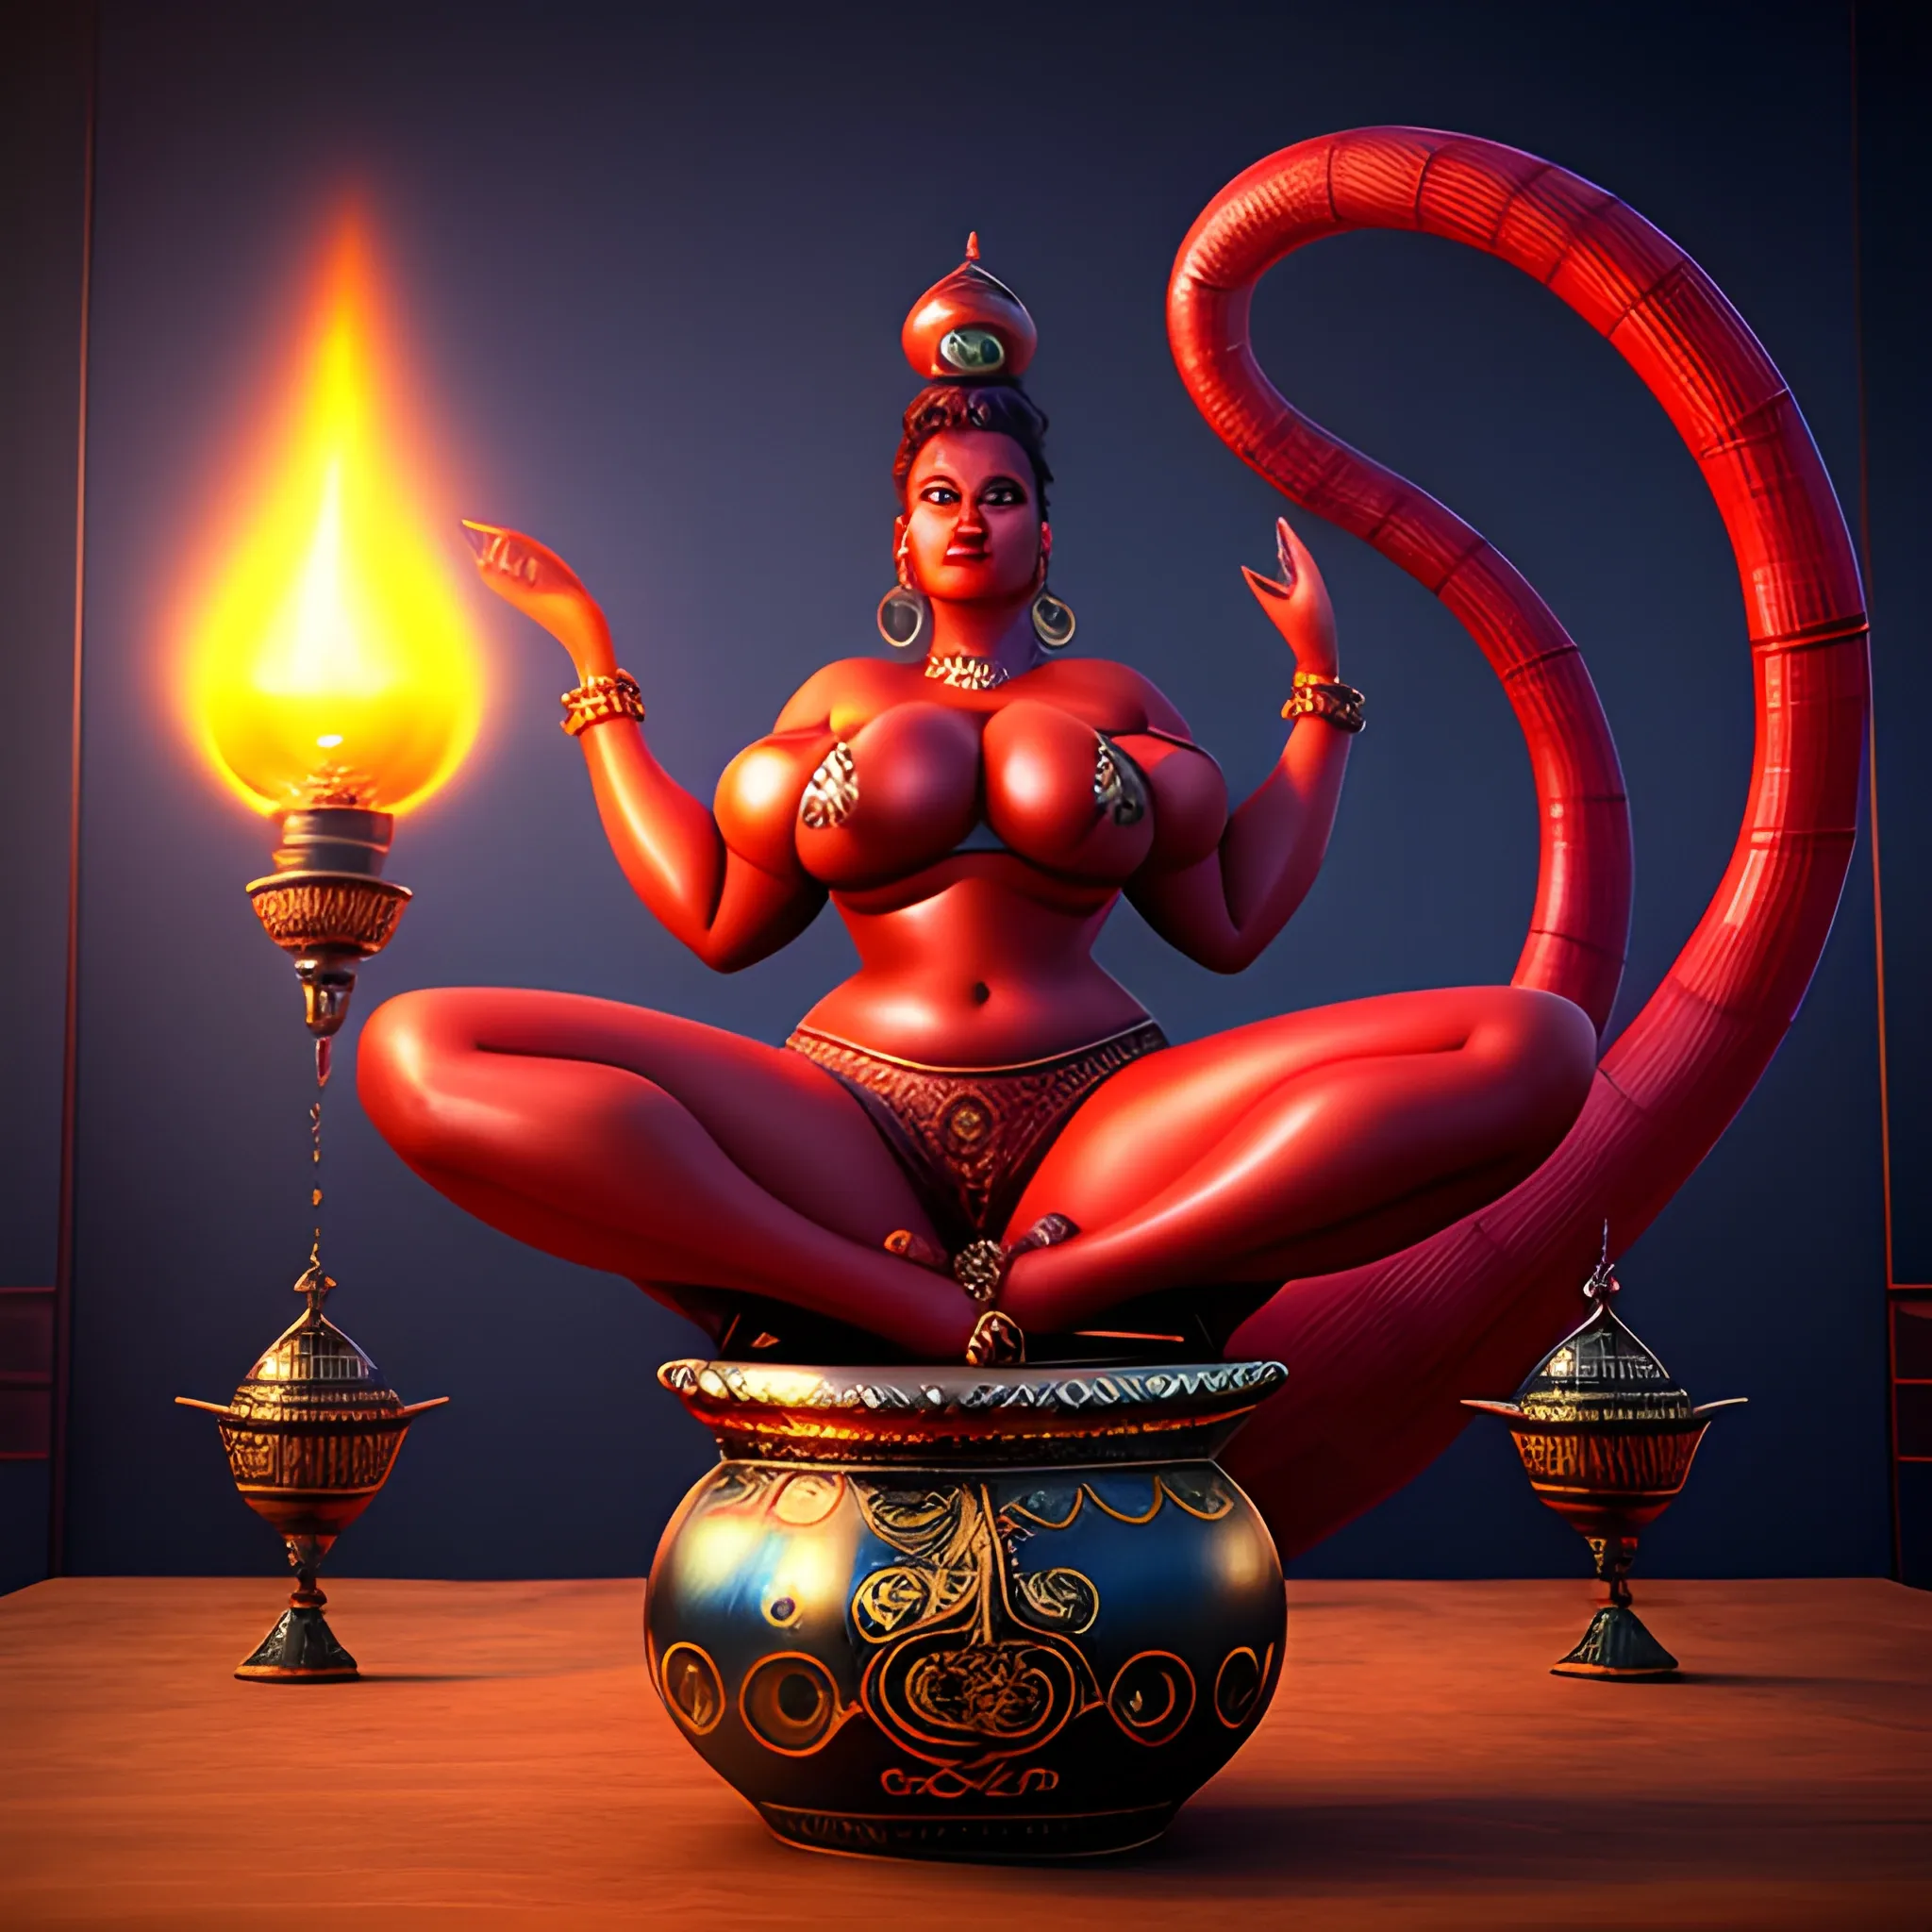  Realistic, high-quality, 8k, extremely detailed photography, high detail photography, big beautiful, adult woman, plus size, gigantic, towering height, female genie with genie tail made of magical red cloud that covers her legs entirely attached to her itty-bitty tiny black magic lamp being summoned from her black magic lamp, she hasn't seen a person in centuries, genie cuffs and jewelry,